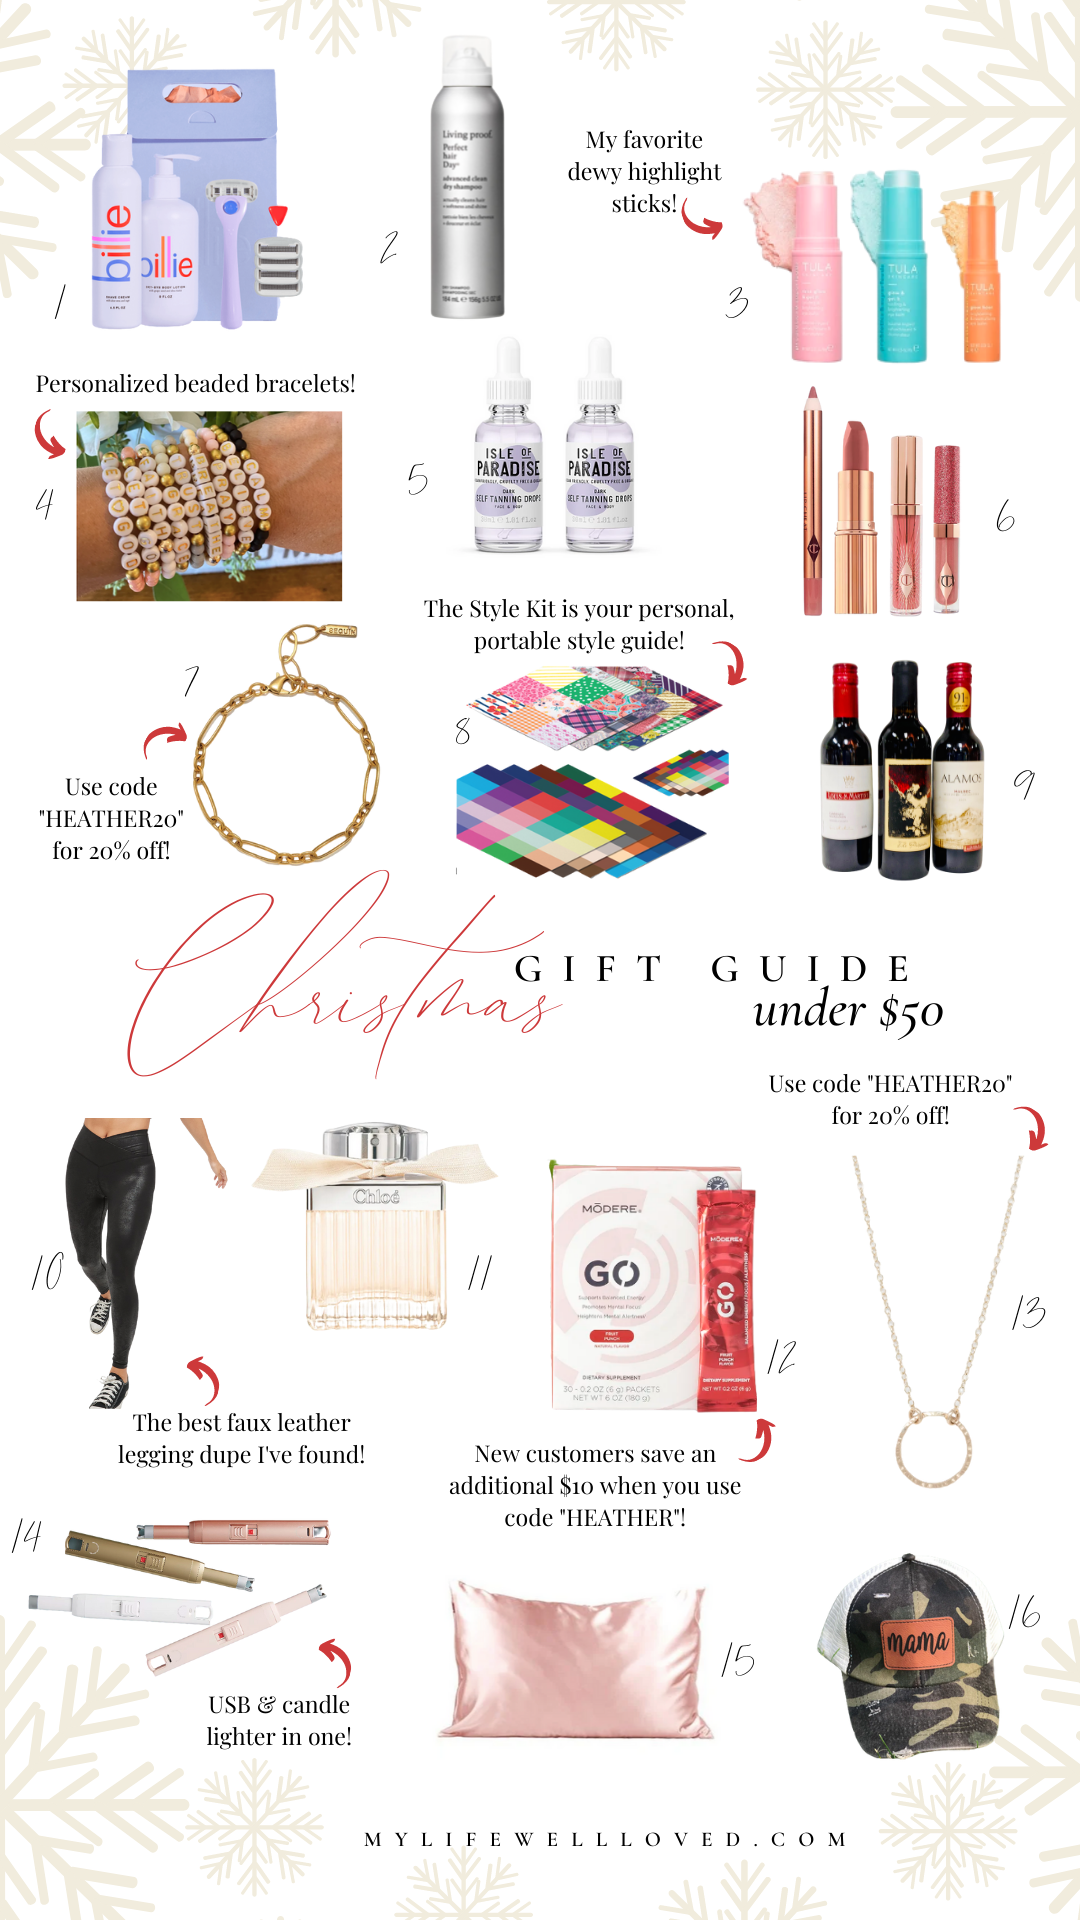 Fashion + beauty blogger, My Life Well Loved, shares gift ideas under $50!